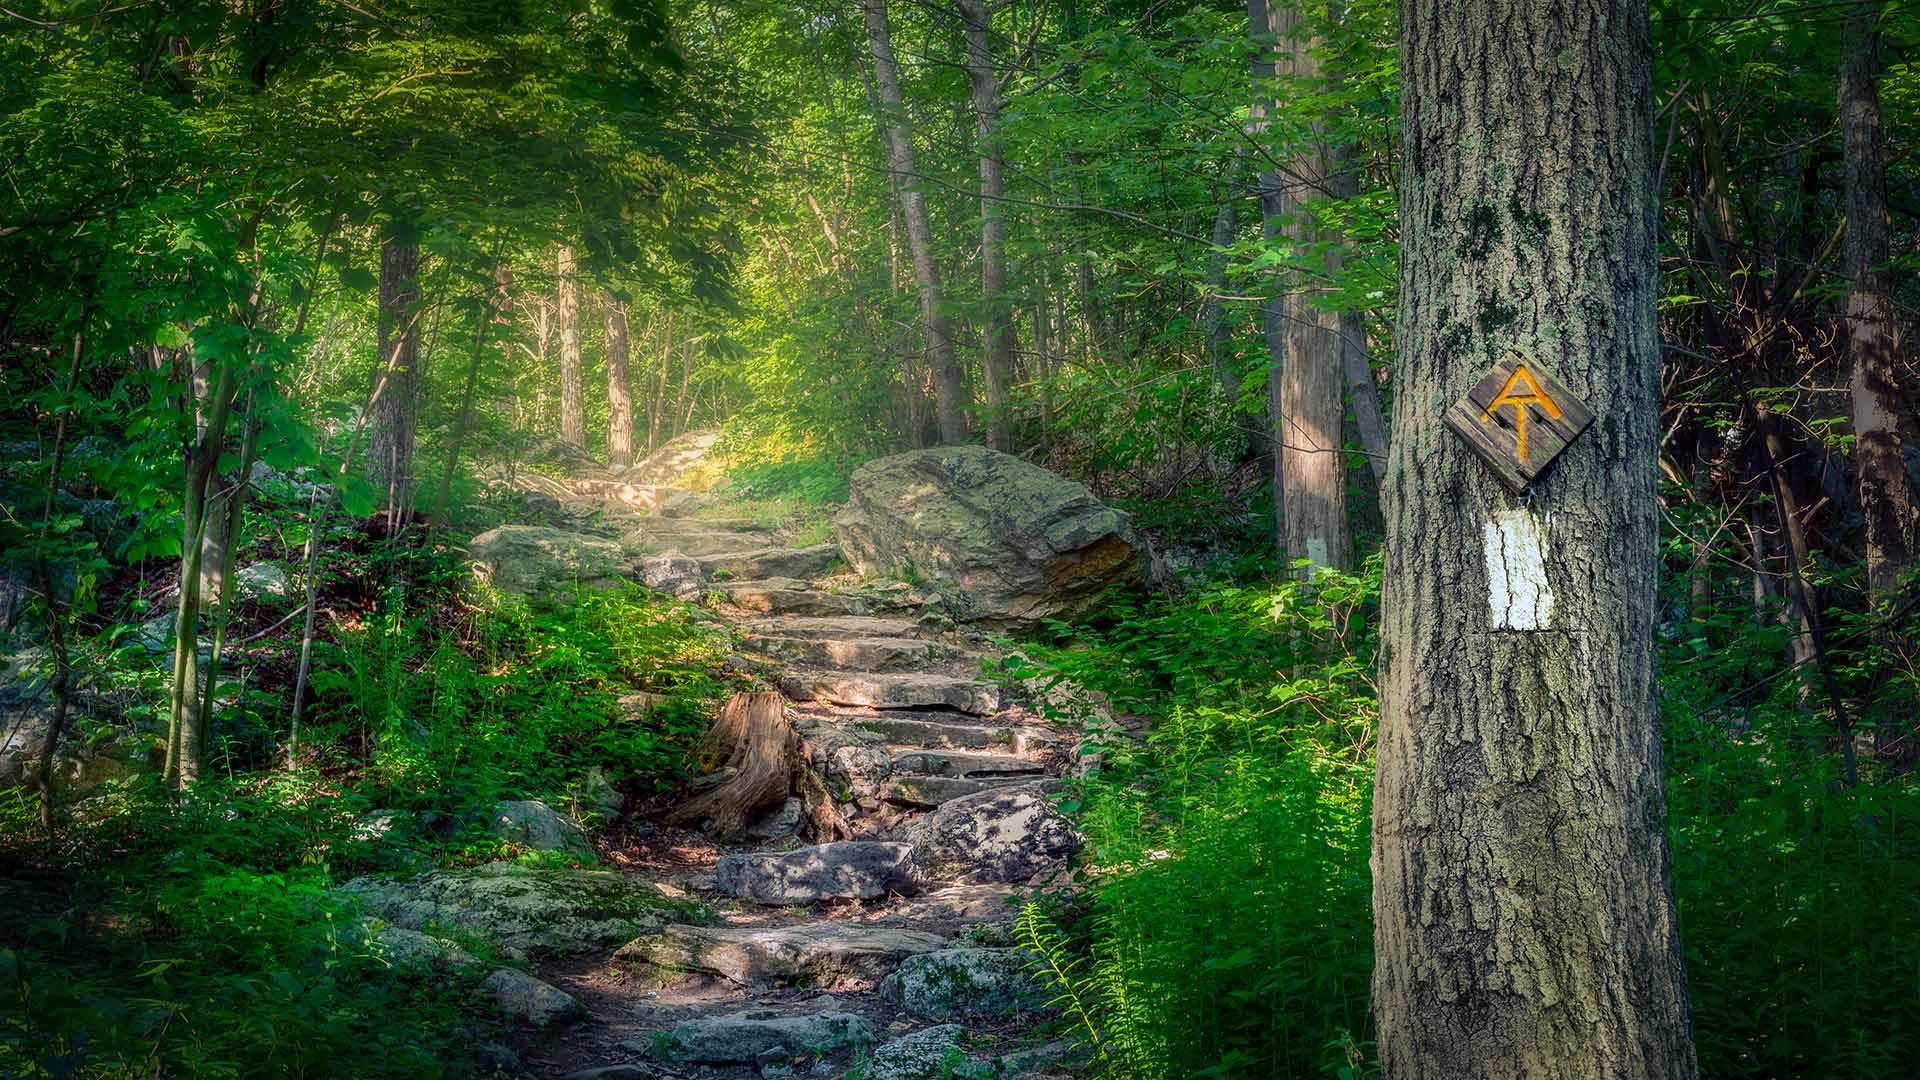 The Appalachian Trail in Stokes State Forest, New Jersey - Frank DeBonis/Getty Images)